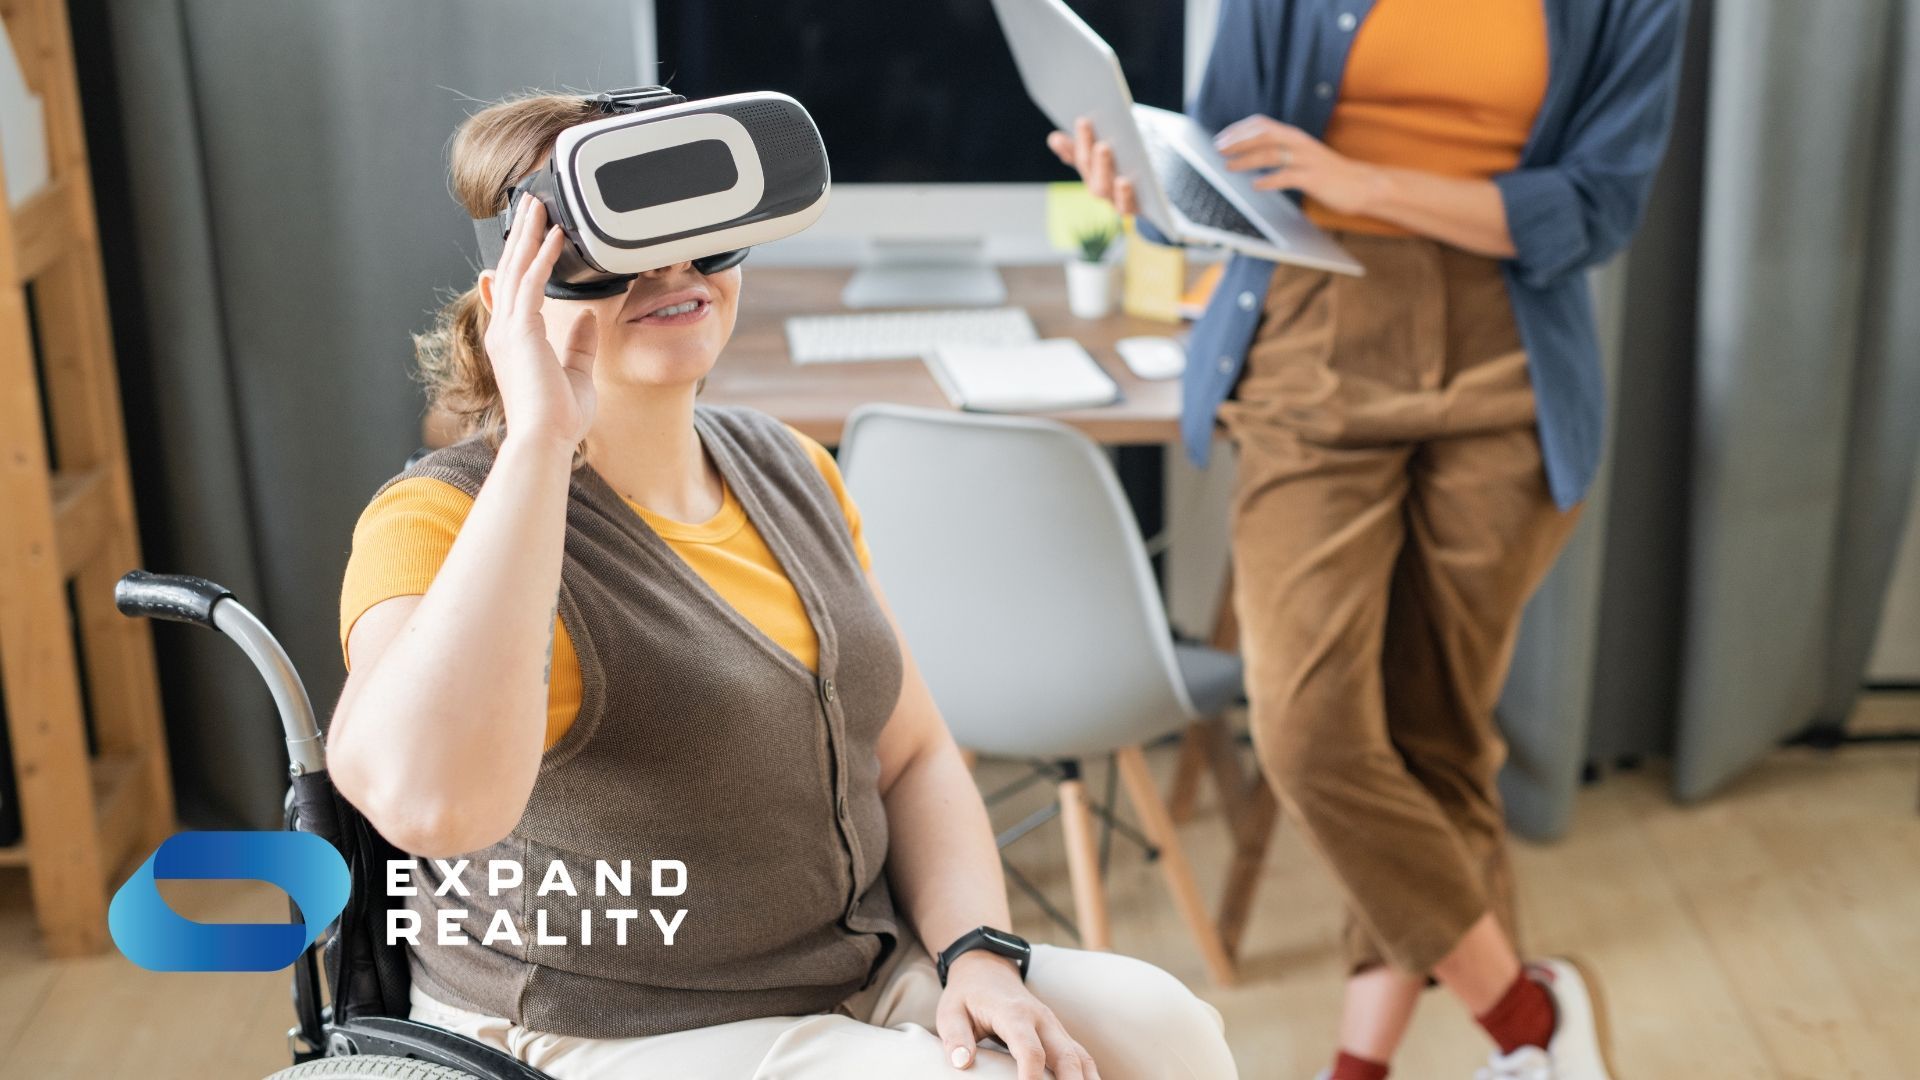 XR is used in many sectors. But how can it help people with disabilities? Learn about some recent innovations – and where things might head next.